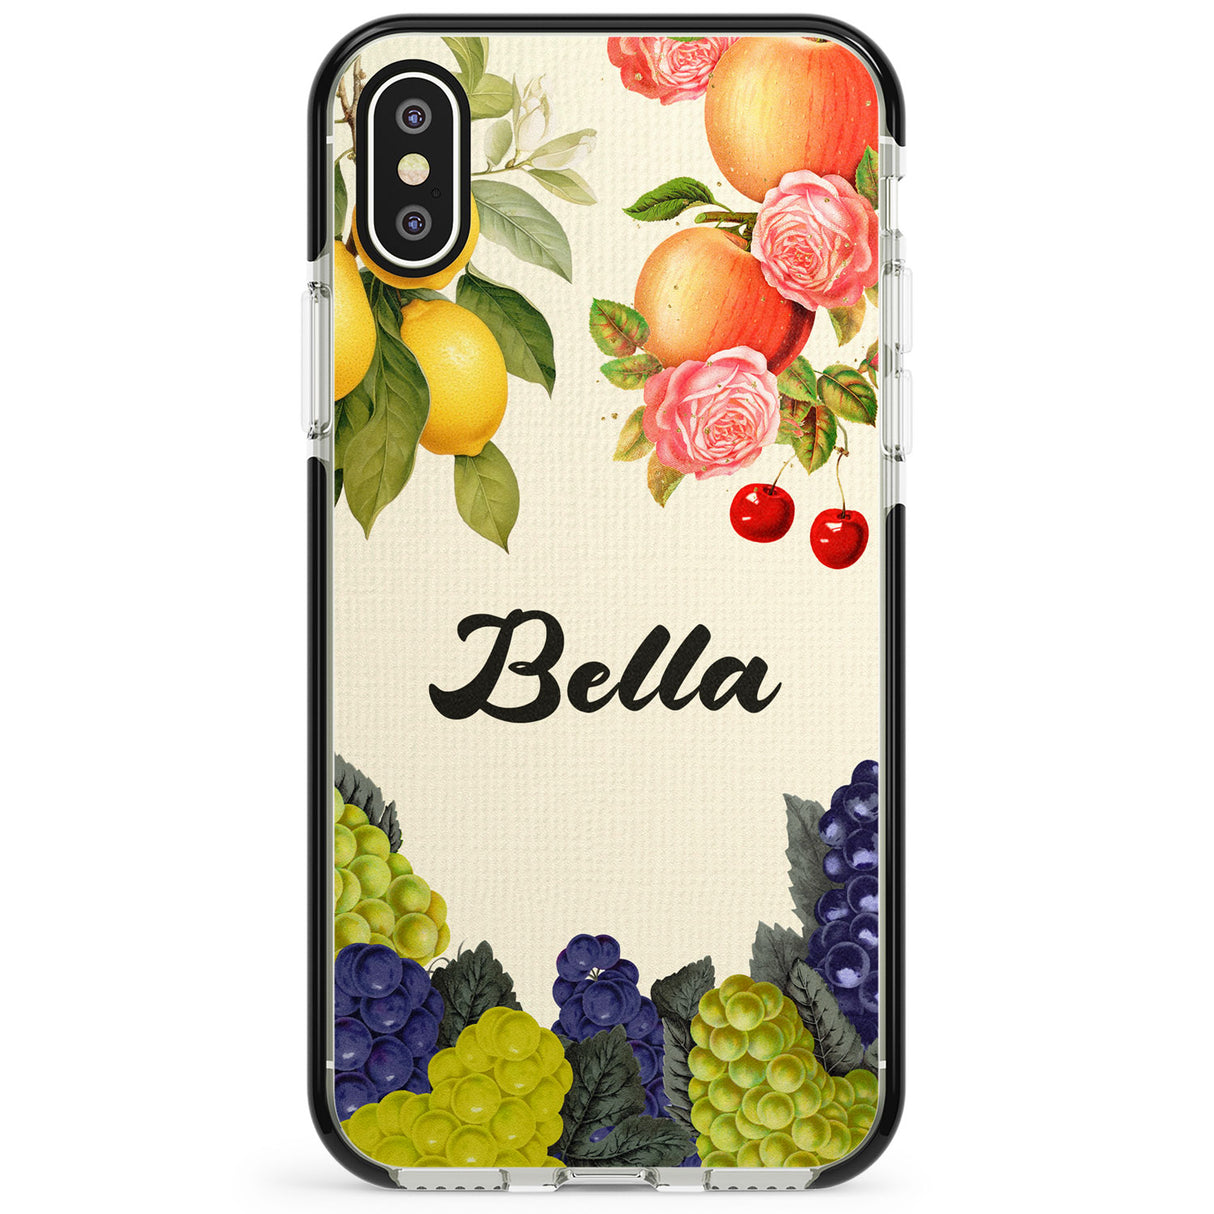 Personalised Vintage Fruits Phone Case for iPhone X XS Max XR